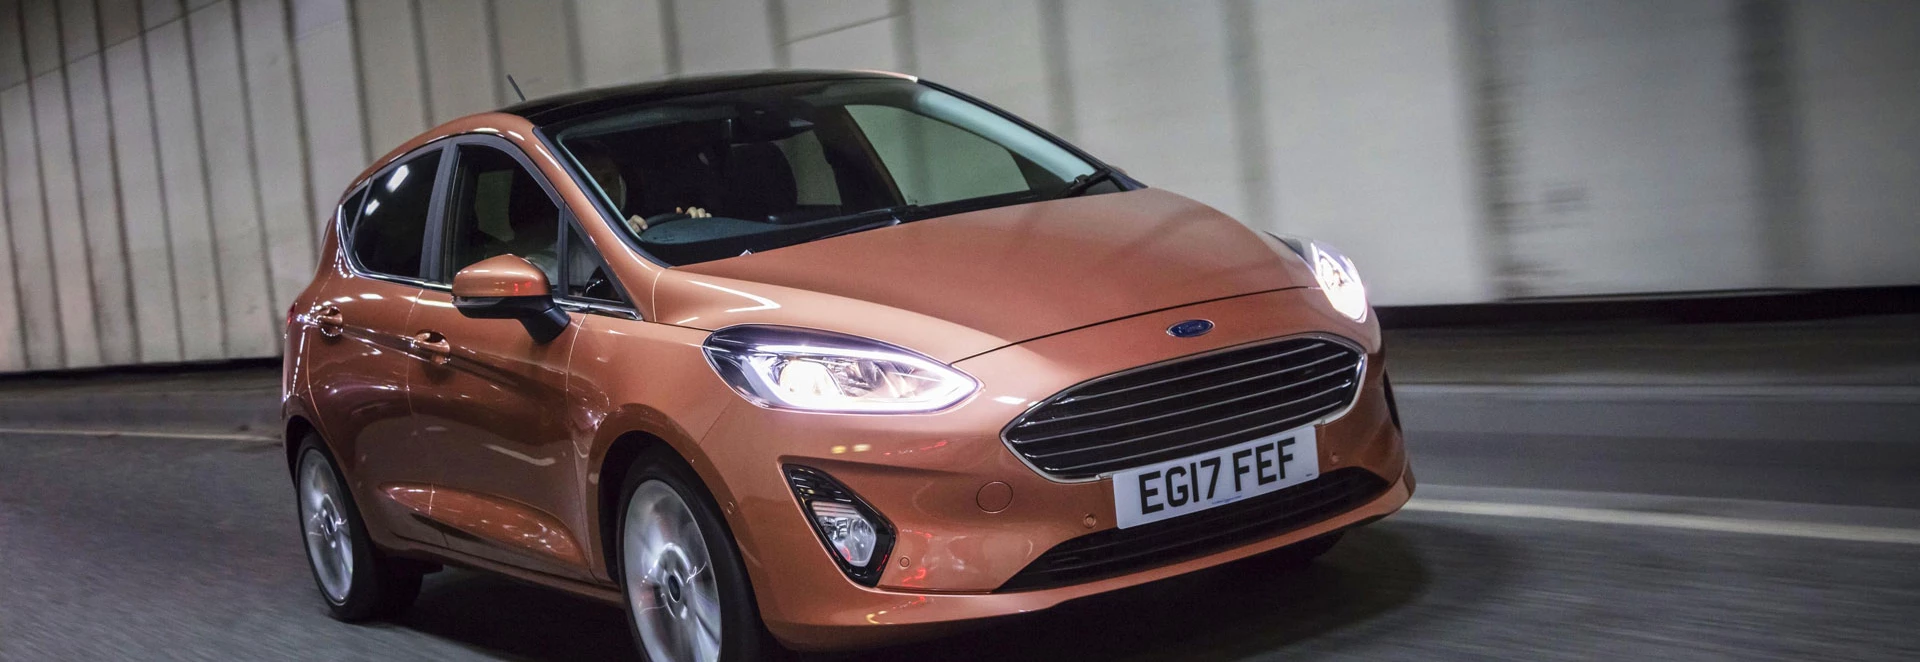 Full pricing and specs unveiled for the 2017 Ford Fiesta 